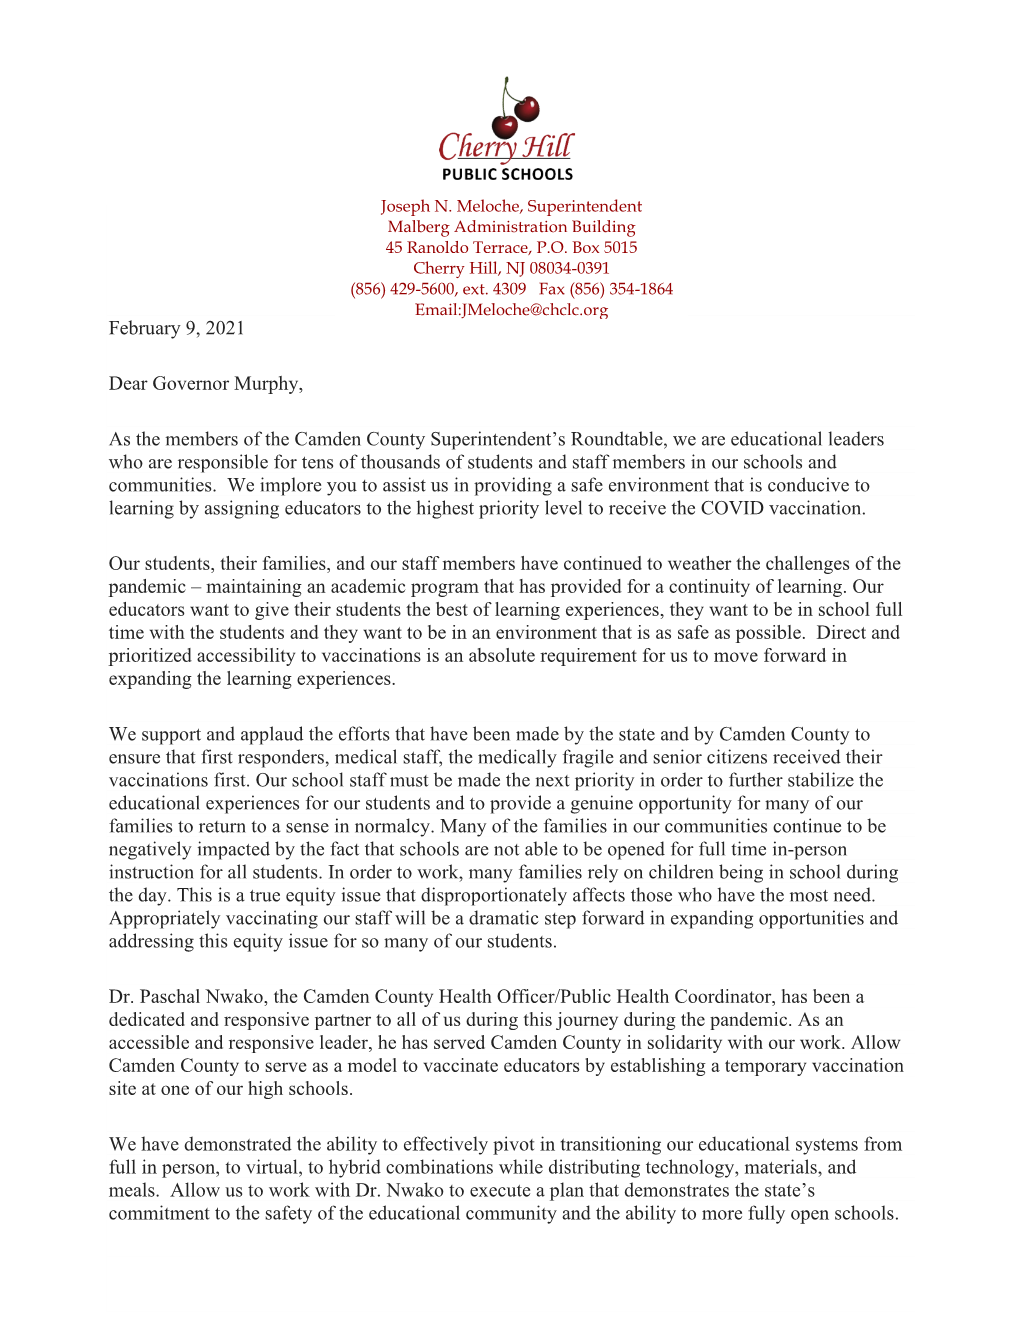 Letter from Dr. Joseph Meloche to Governor Murphy February 9, 2021